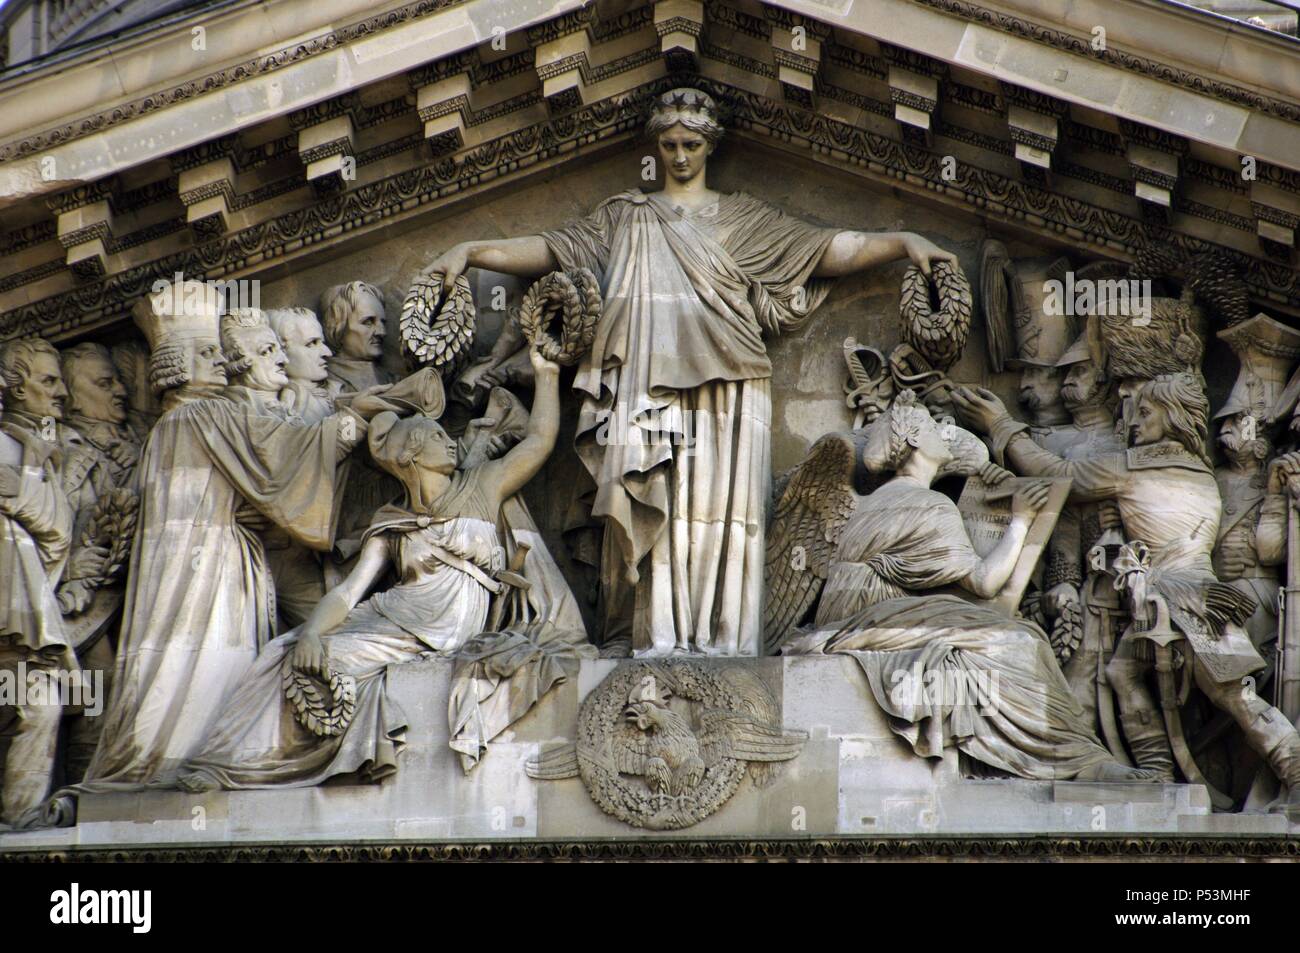 France. Paris. Pantheon's pediment. Detail. Sculpted by Pierre-Jean David dÕAngers (1788-1856). In the center, the Republic handing crowns to Liberty (left) while History (right corner) writes down the names of those deemed worthy of the crowns. In the first row, the recipients are Malesherbes, Mirabeau, Monge and Fenelon. In the second row are Lazare Carnot, Berthollet and Laplace. To the right of the central group, Napoleon Bonaparte leads an army of anonymous soldiers. Stock Photo